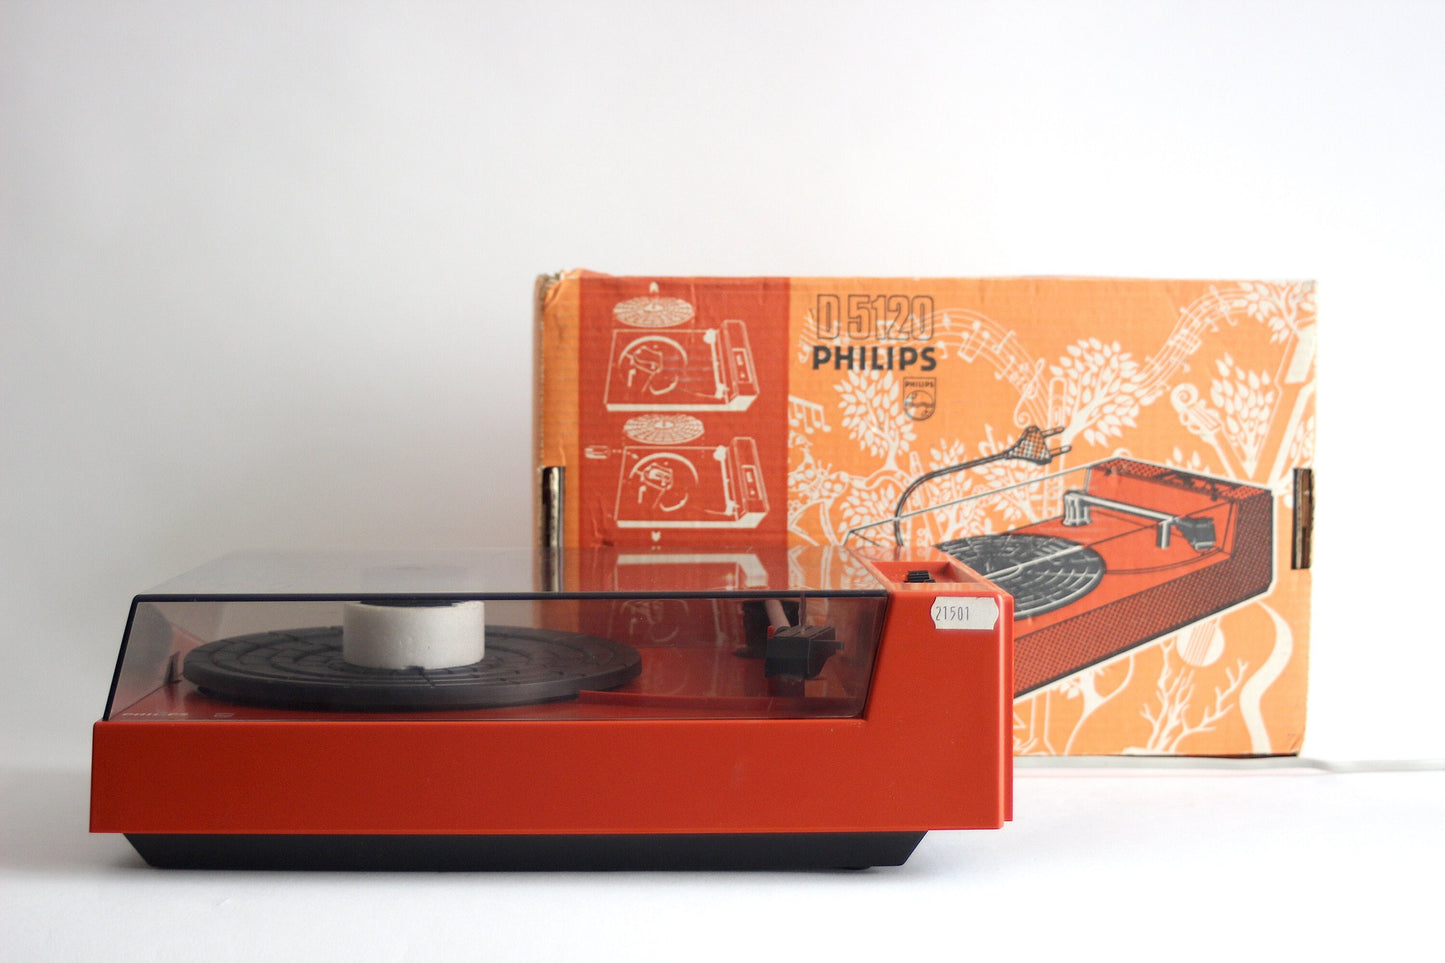 PHILIPS turntable mode Music 5120 D5120/00L. France 1984.